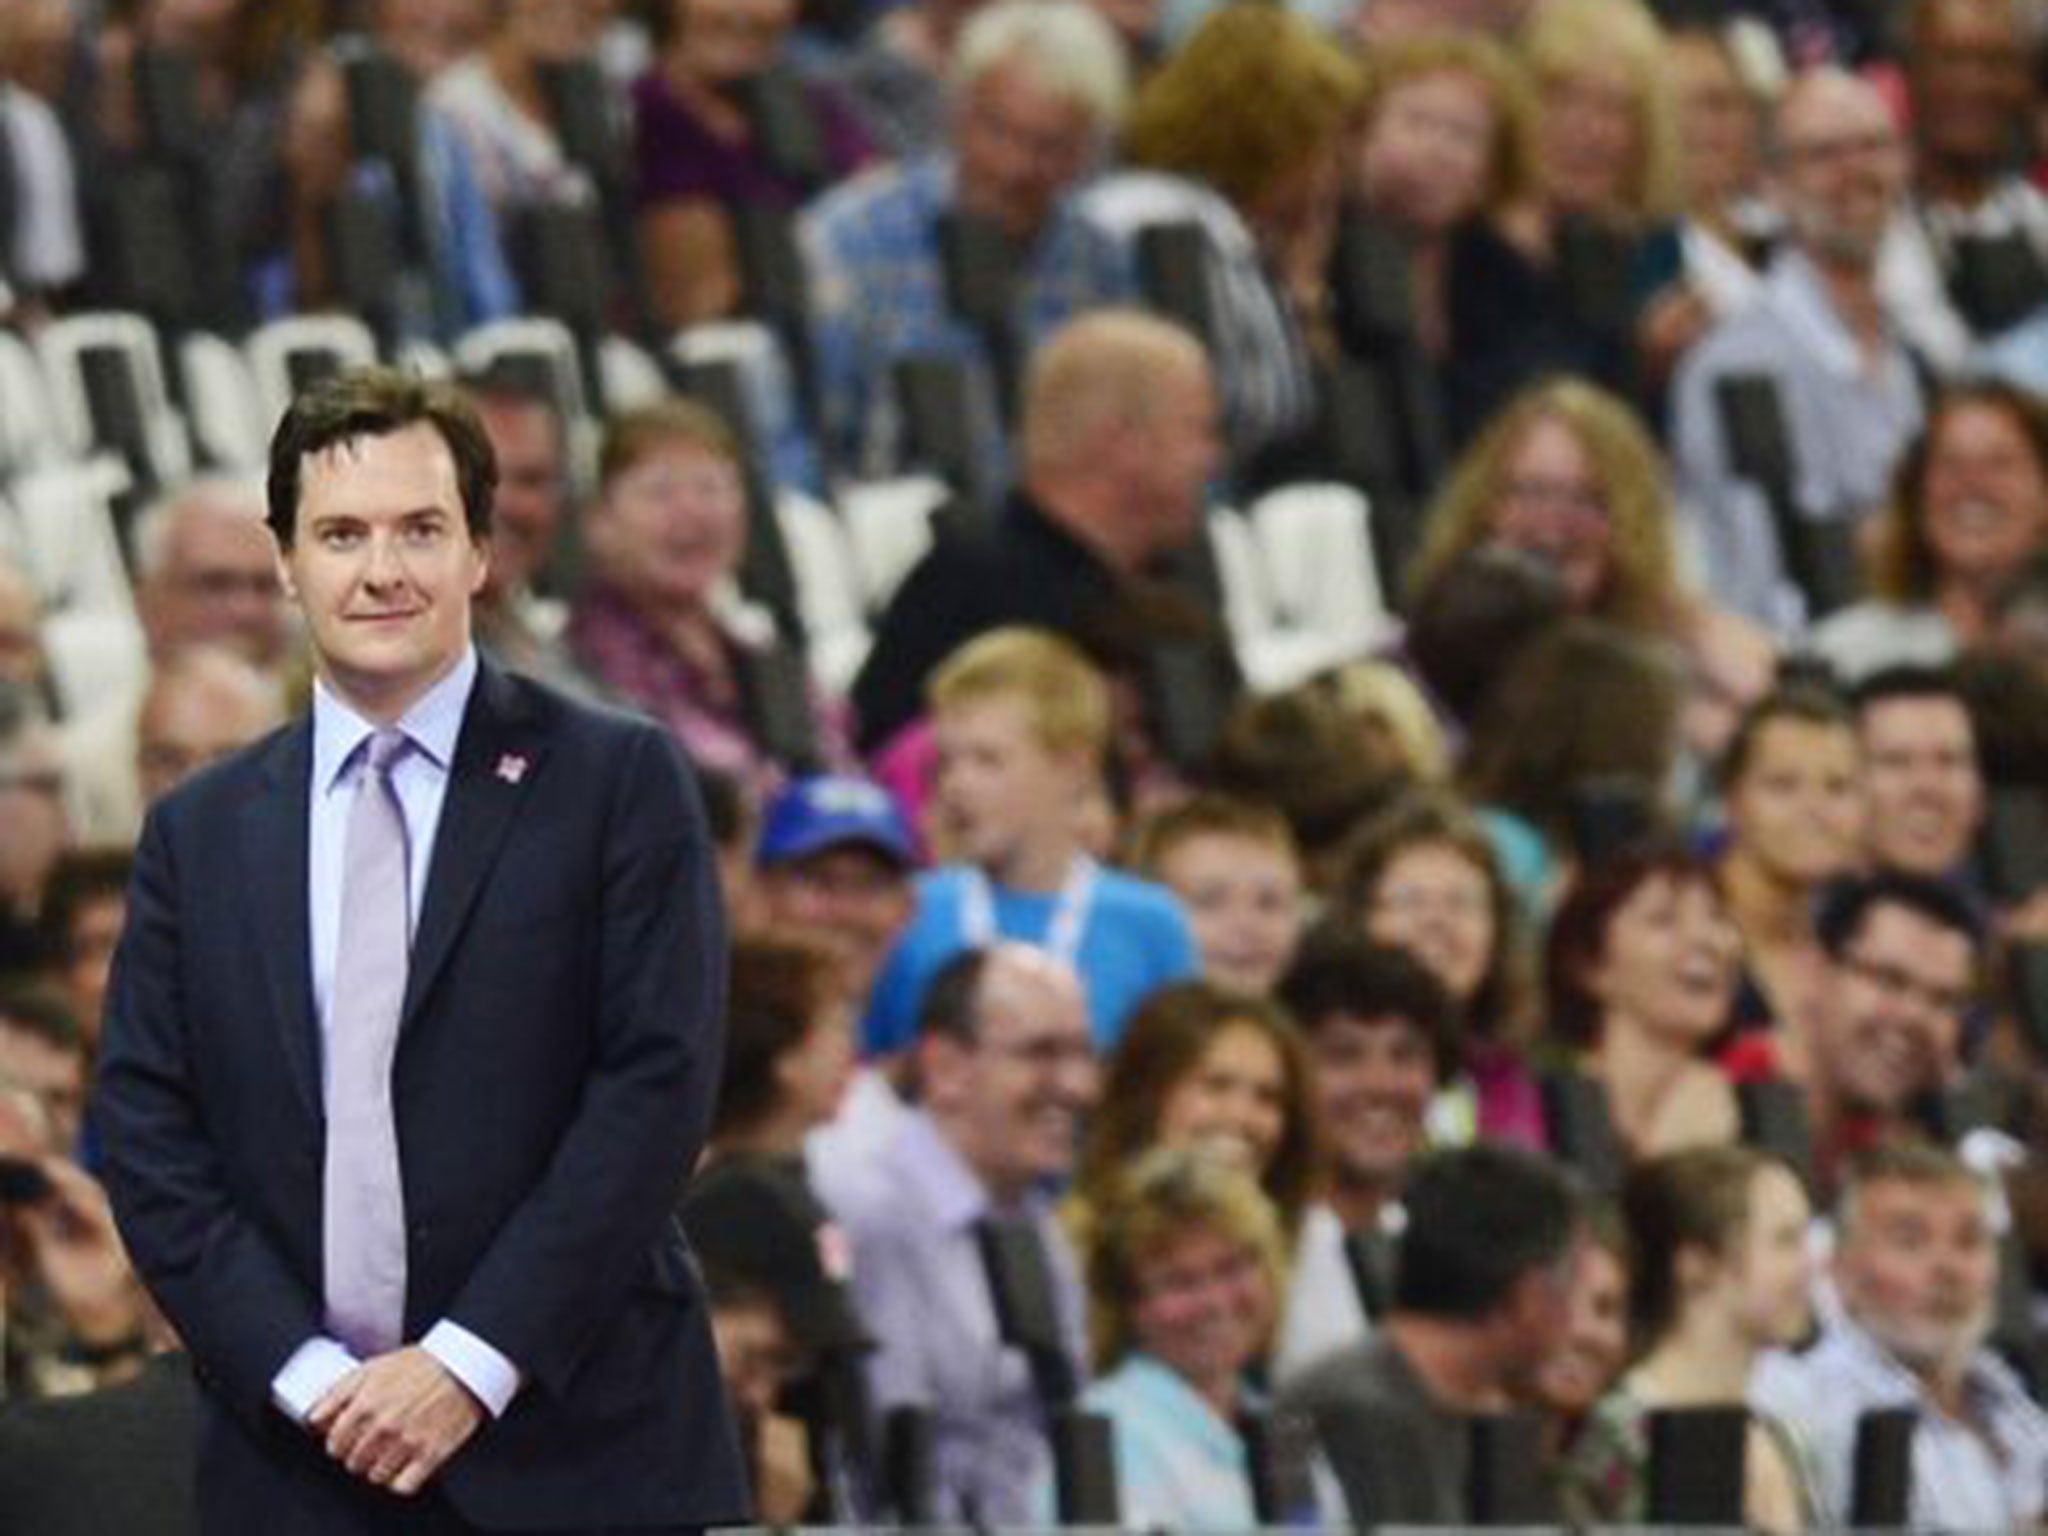 The Chancellor has bounced back from his annus horribilis after getting booed at the Paralympics two years ago